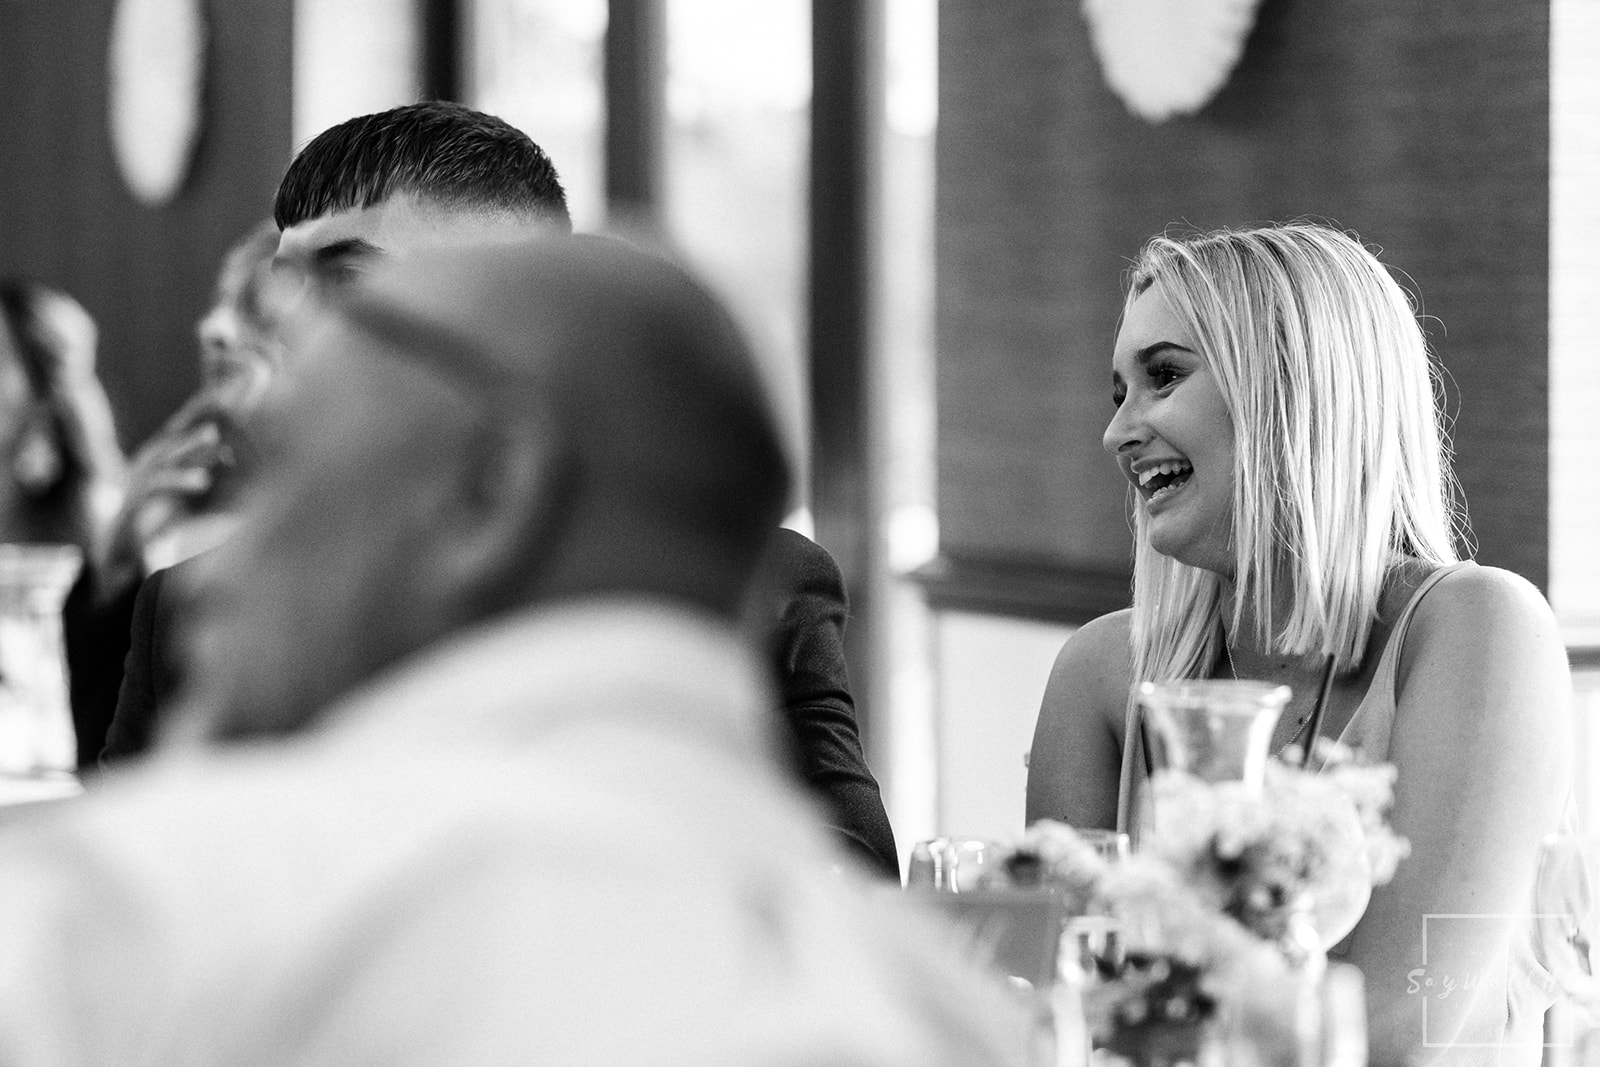 Sigma 85mm F1.4 DG DN | wedding guest smiling during the wedding speeches